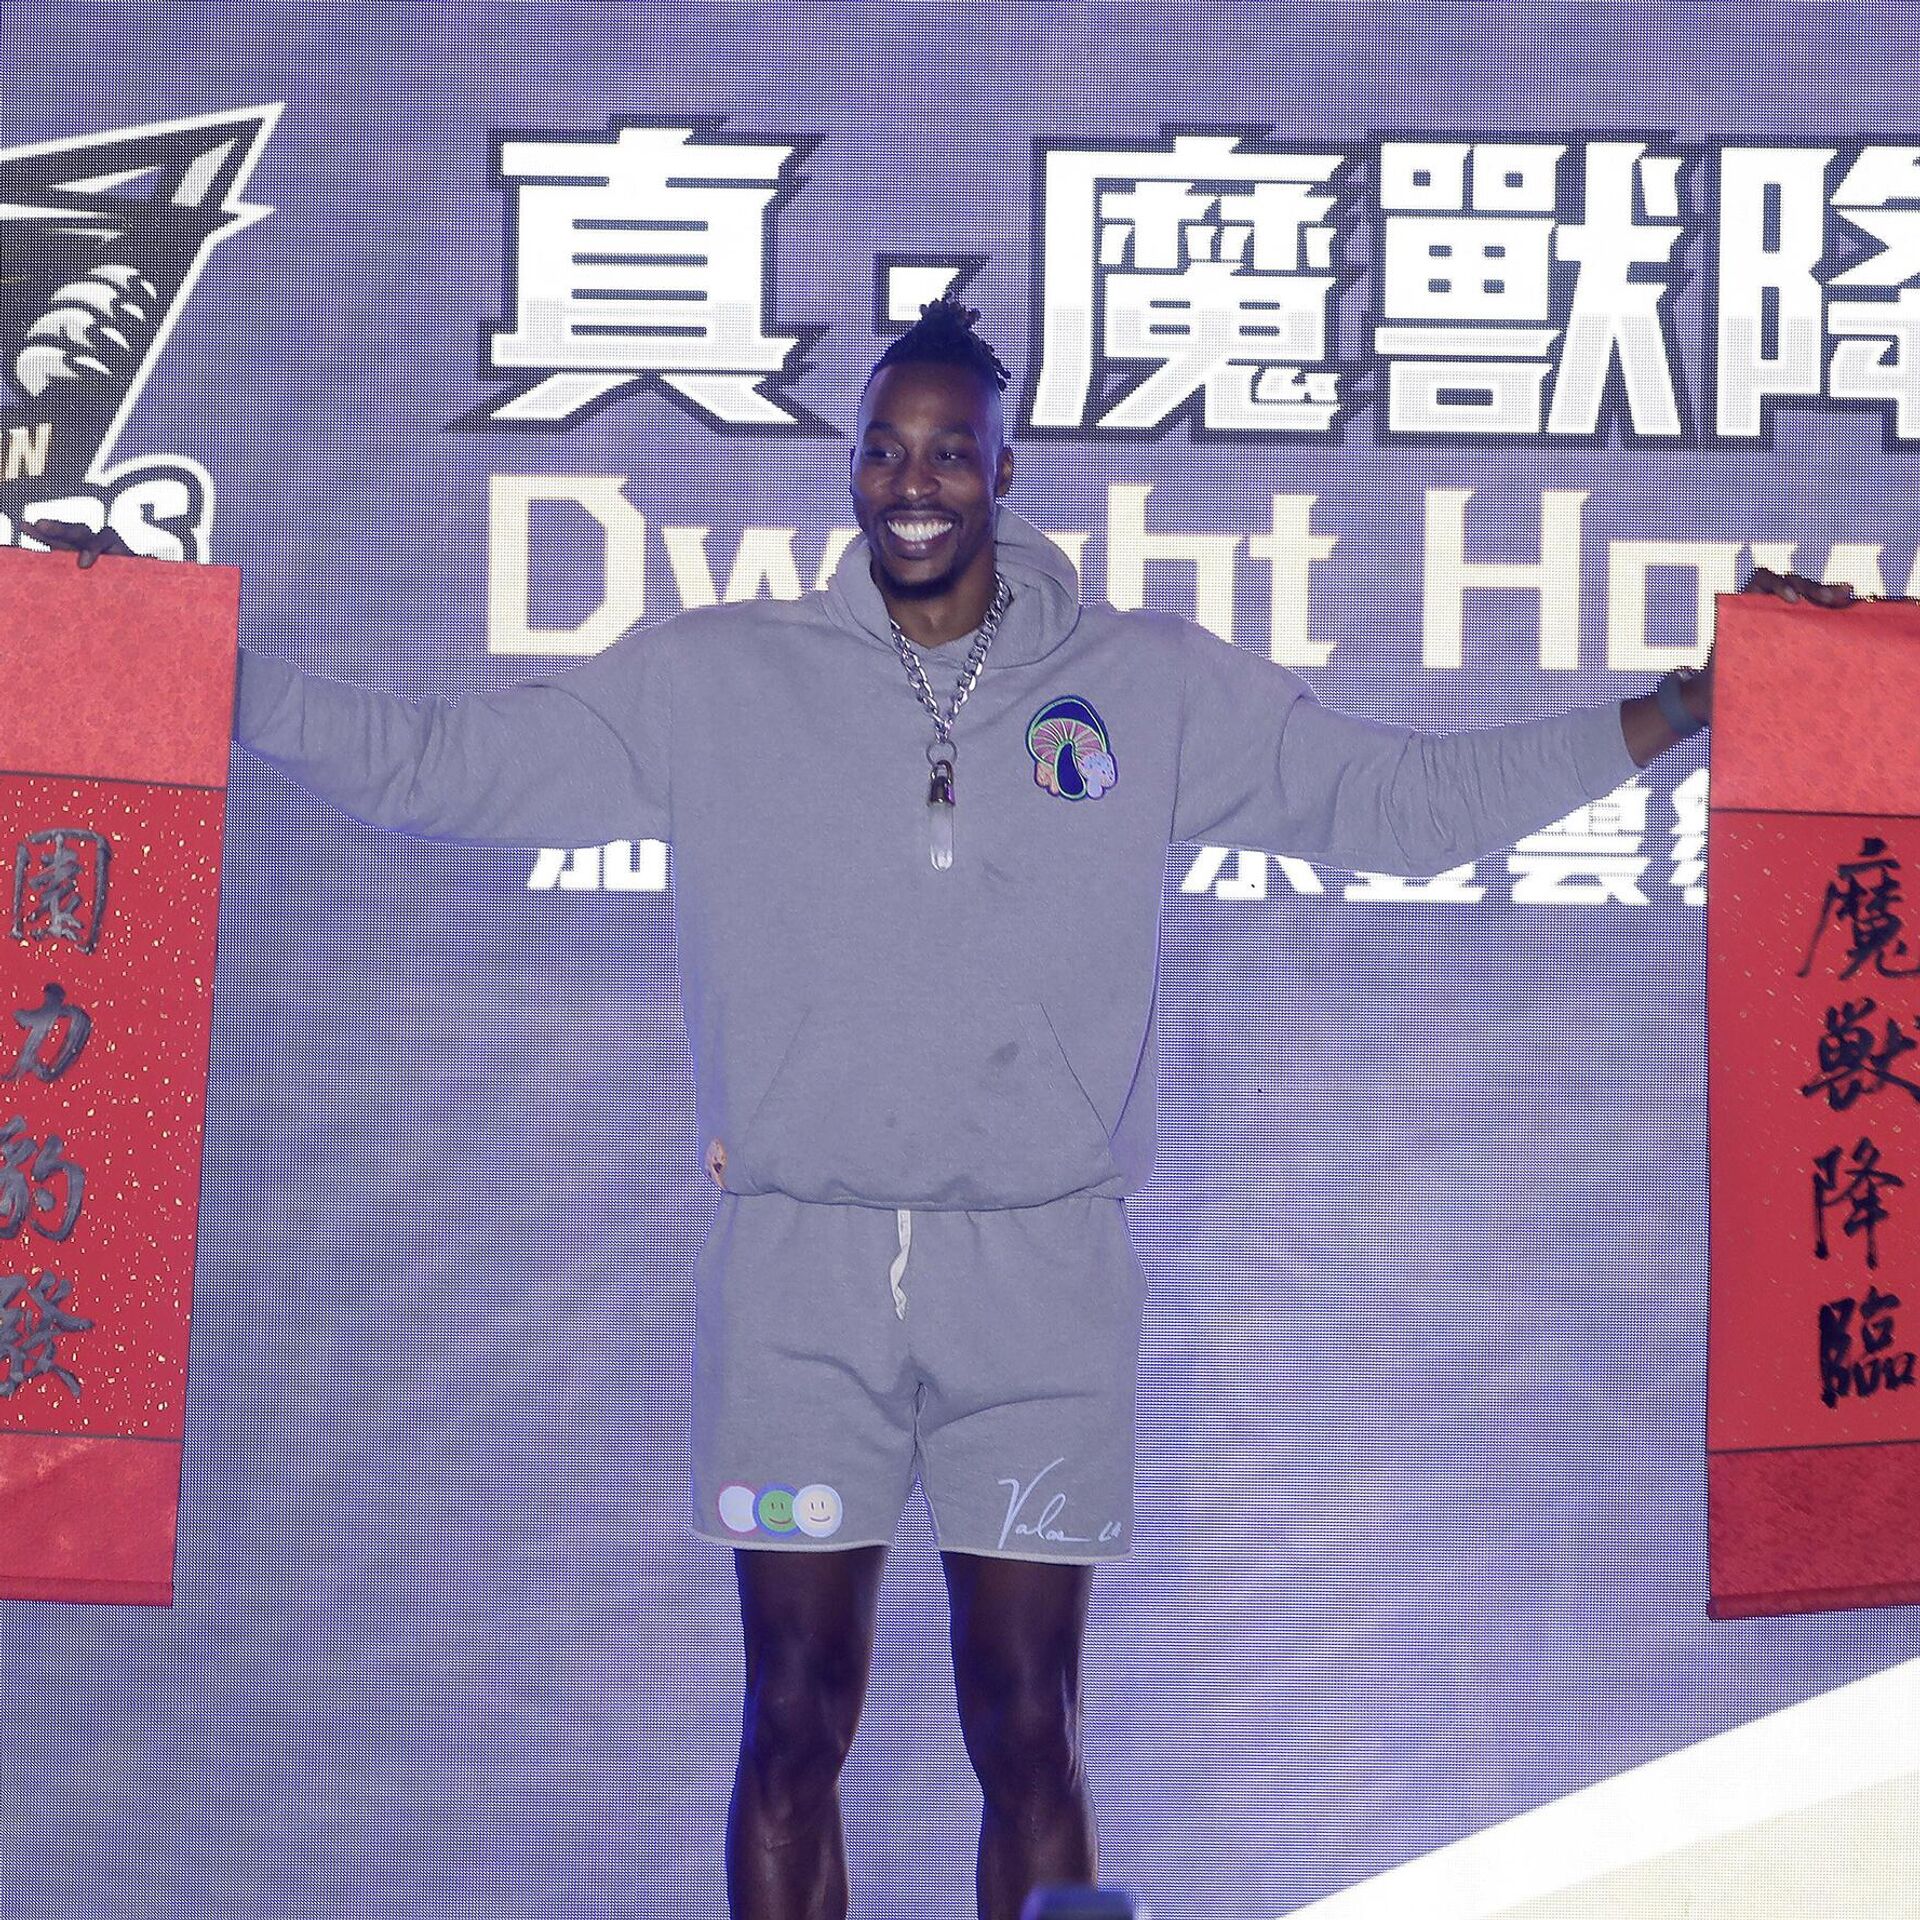 Dwight Howard: Ex-NBA star's Taiwan comment sparks anger in China - BBC News